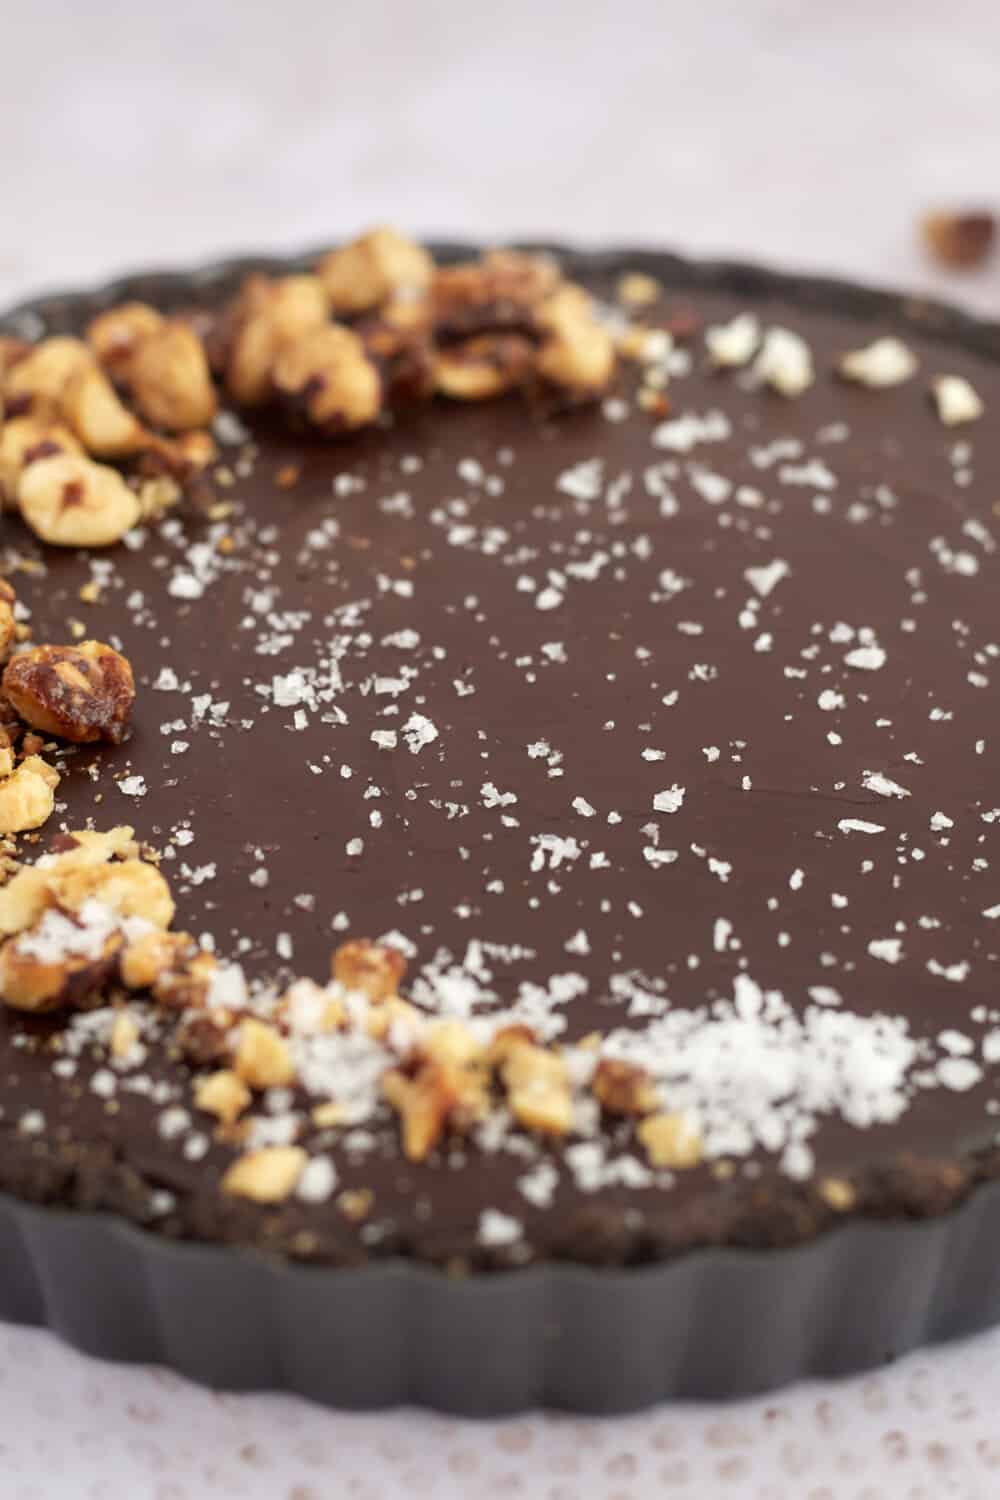 a tart with chocolate filling topped with hazelnuts and salt